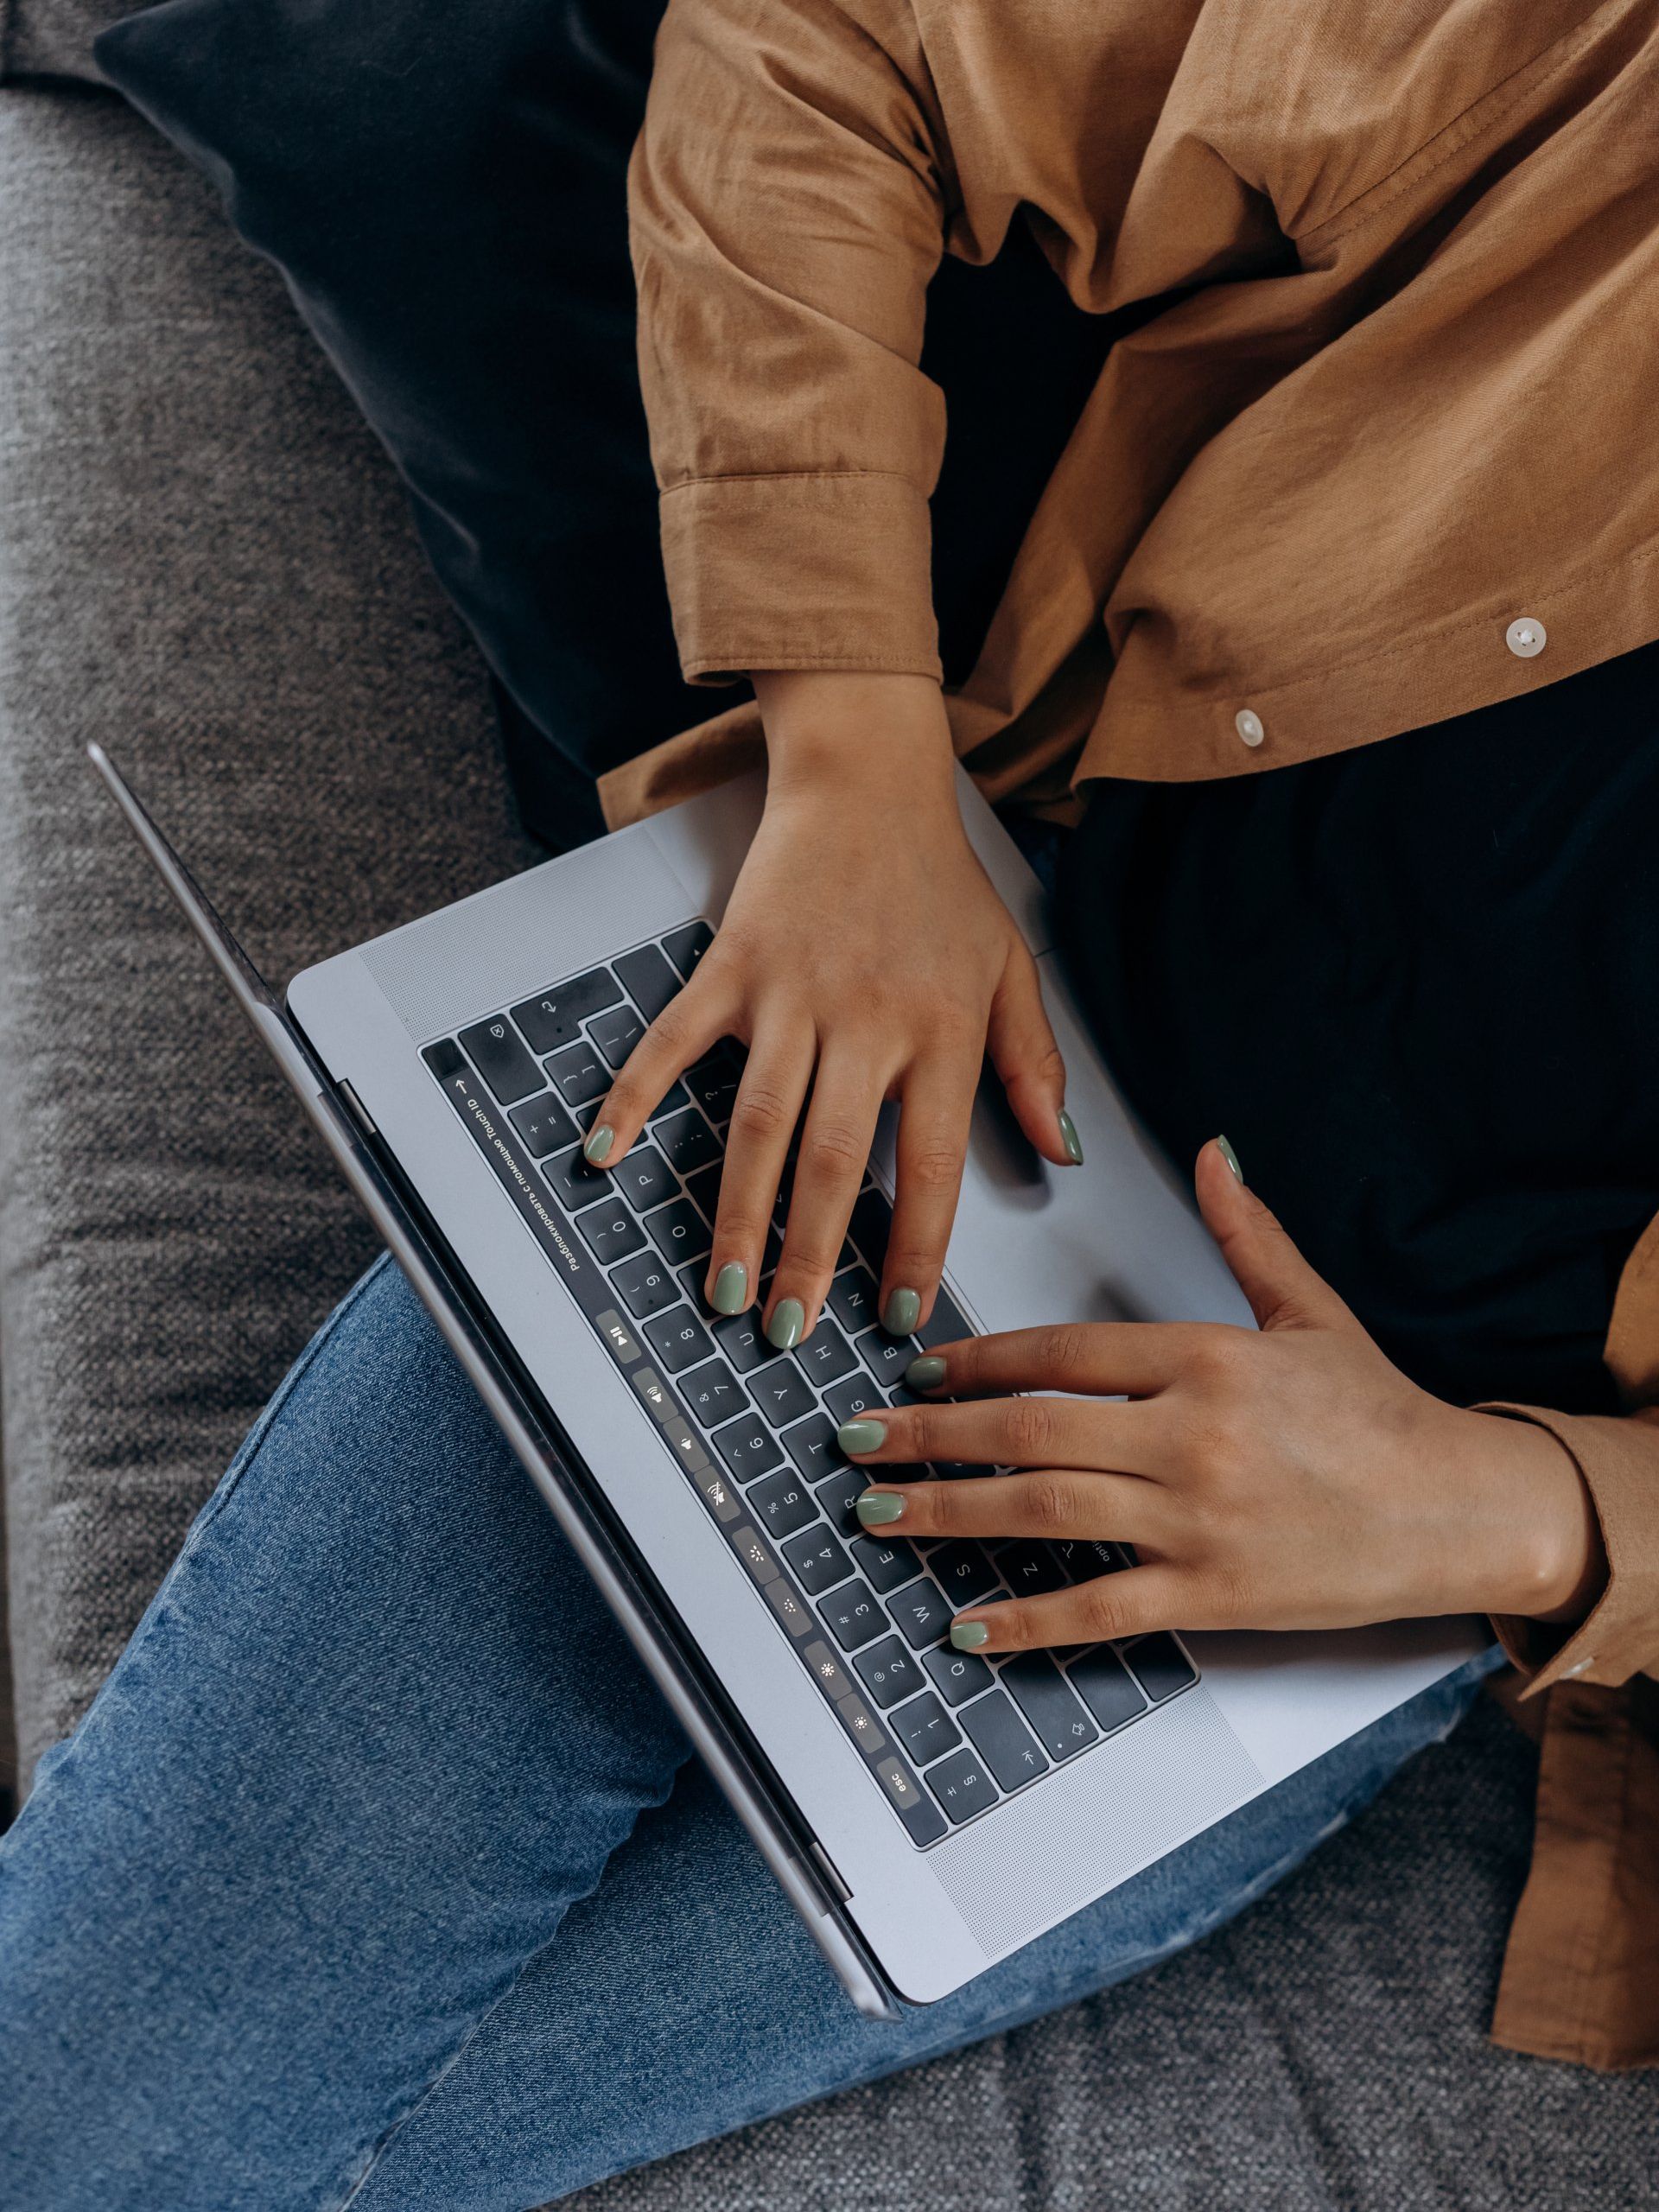 woman holding a laptop in her lap typing